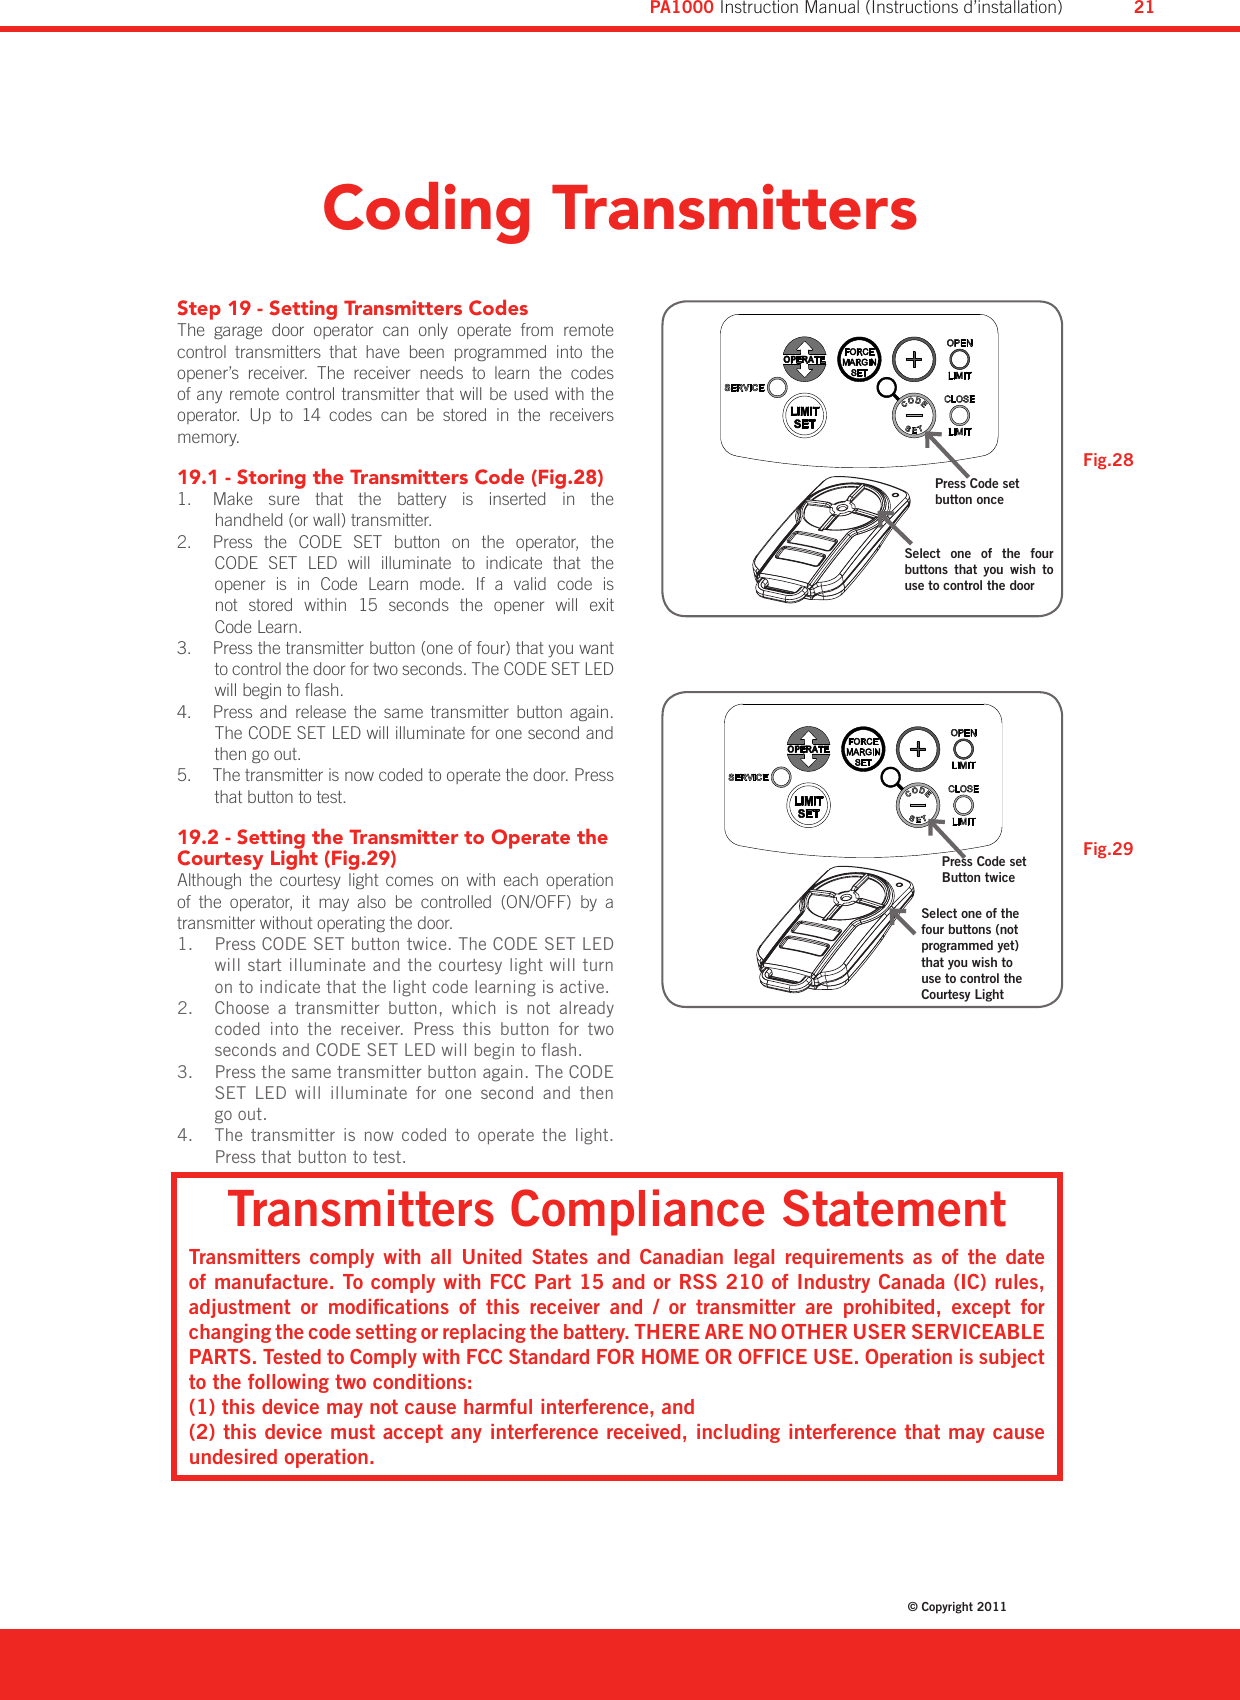 Coding TransmittersStep 19 - Setting Transmitters CodesThe  garage  door  operator  can  only  operate  from  remote control  transmitters  that  have  been  programmed  into  the opener’s  receiver.  The  receiver  needs  to  learn  the  codes of any remote control transmitter that will be used with the operator.  Up  to  14  codes  can  be  stored  in  the  receivers memory.19.1 - Storing the Transmitters Code (Fig.28)   Make  sure  that  the  battery  is  inserted  in  the  1. handheld (or wall) transmitter.  Press  the  CODE  SET  button  on  the  operator,  the  2. CODE  SET  LED  will  illuminate  to  indicate  that  the  opener  is  in  Code  Learn  mode.  If  a  valid  code  is  not  stored  within  15  seconds  the  opener  will  exit  Code Learn.  Press the transmitter button (one of four) that you want 3. to control the door for two seconds. The CODE SET LED will begin to ash.  Press  and  release  the  same  transmitter  button  again. 4. The CODE SET LED will illuminate for one second and then go out.  The transmitter is now coded to operate the door. Press 5. that button to test.19.2 - Setting the Transmitter to Operate the Courtesy Light (Fig.29)Although  the  courtesy  light  comes  on with  each  operation of  the  operator,  it  may  also  be  controlled  (ON/OFF)  by  a transmitter without operating the door. Press CODE SET button twice. The CODE SET LED 1. will start illuminate and the courtesy light will turn on to indicate that the light code learning is active.Choose  a  transmitter  button,  which  is  not  already 2. coded  into  the  receiver.  Press  this  button  for  two seconds and CODE SET LED will begin to ash. Press the same transmitter button again. The CODE 3. SET  LED  will  illuminate  for  one  second  and  then go out.The  transmitter  is  now  coded  to  operate  the  light. 4. Press that button to test.Press Code set button onceSelect  one  of  the  four buttons  that  you  wish  to use to control the doorPress Code set Button twiceSelect one of the four buttons (not programmed yet) that you wish to use to control the Courtesy LightFig.28Fig.29Transmitters Compliance StatementTransmitters  comply  with  all  United  States and  Canadian  legal  requirements  as  of  the  date of manufacture. To comply with FCC Part 15 and or RSS 210 of Industry Canada (IC) rules, adjustment  or  modications  of  this  receiver  and  /  or  transmitter  are  prohibited,  except  for changing the code setting or replacing the battery. THERE ARE NO OTHER USER SERVICEABLE PARTS. Tested to Comply with FCC Standard FOR HOME OR OFFICE USE. Operation is subject to the following two conditions:(1) this device may not cause harmful interference, and(2) this device must accept any interference received, including interference that may cause undesired operation.Diamond PD Power Drive : Instruction Manual© Copyright 201121PA1000 Instruction Manual (Instructions d’installation)